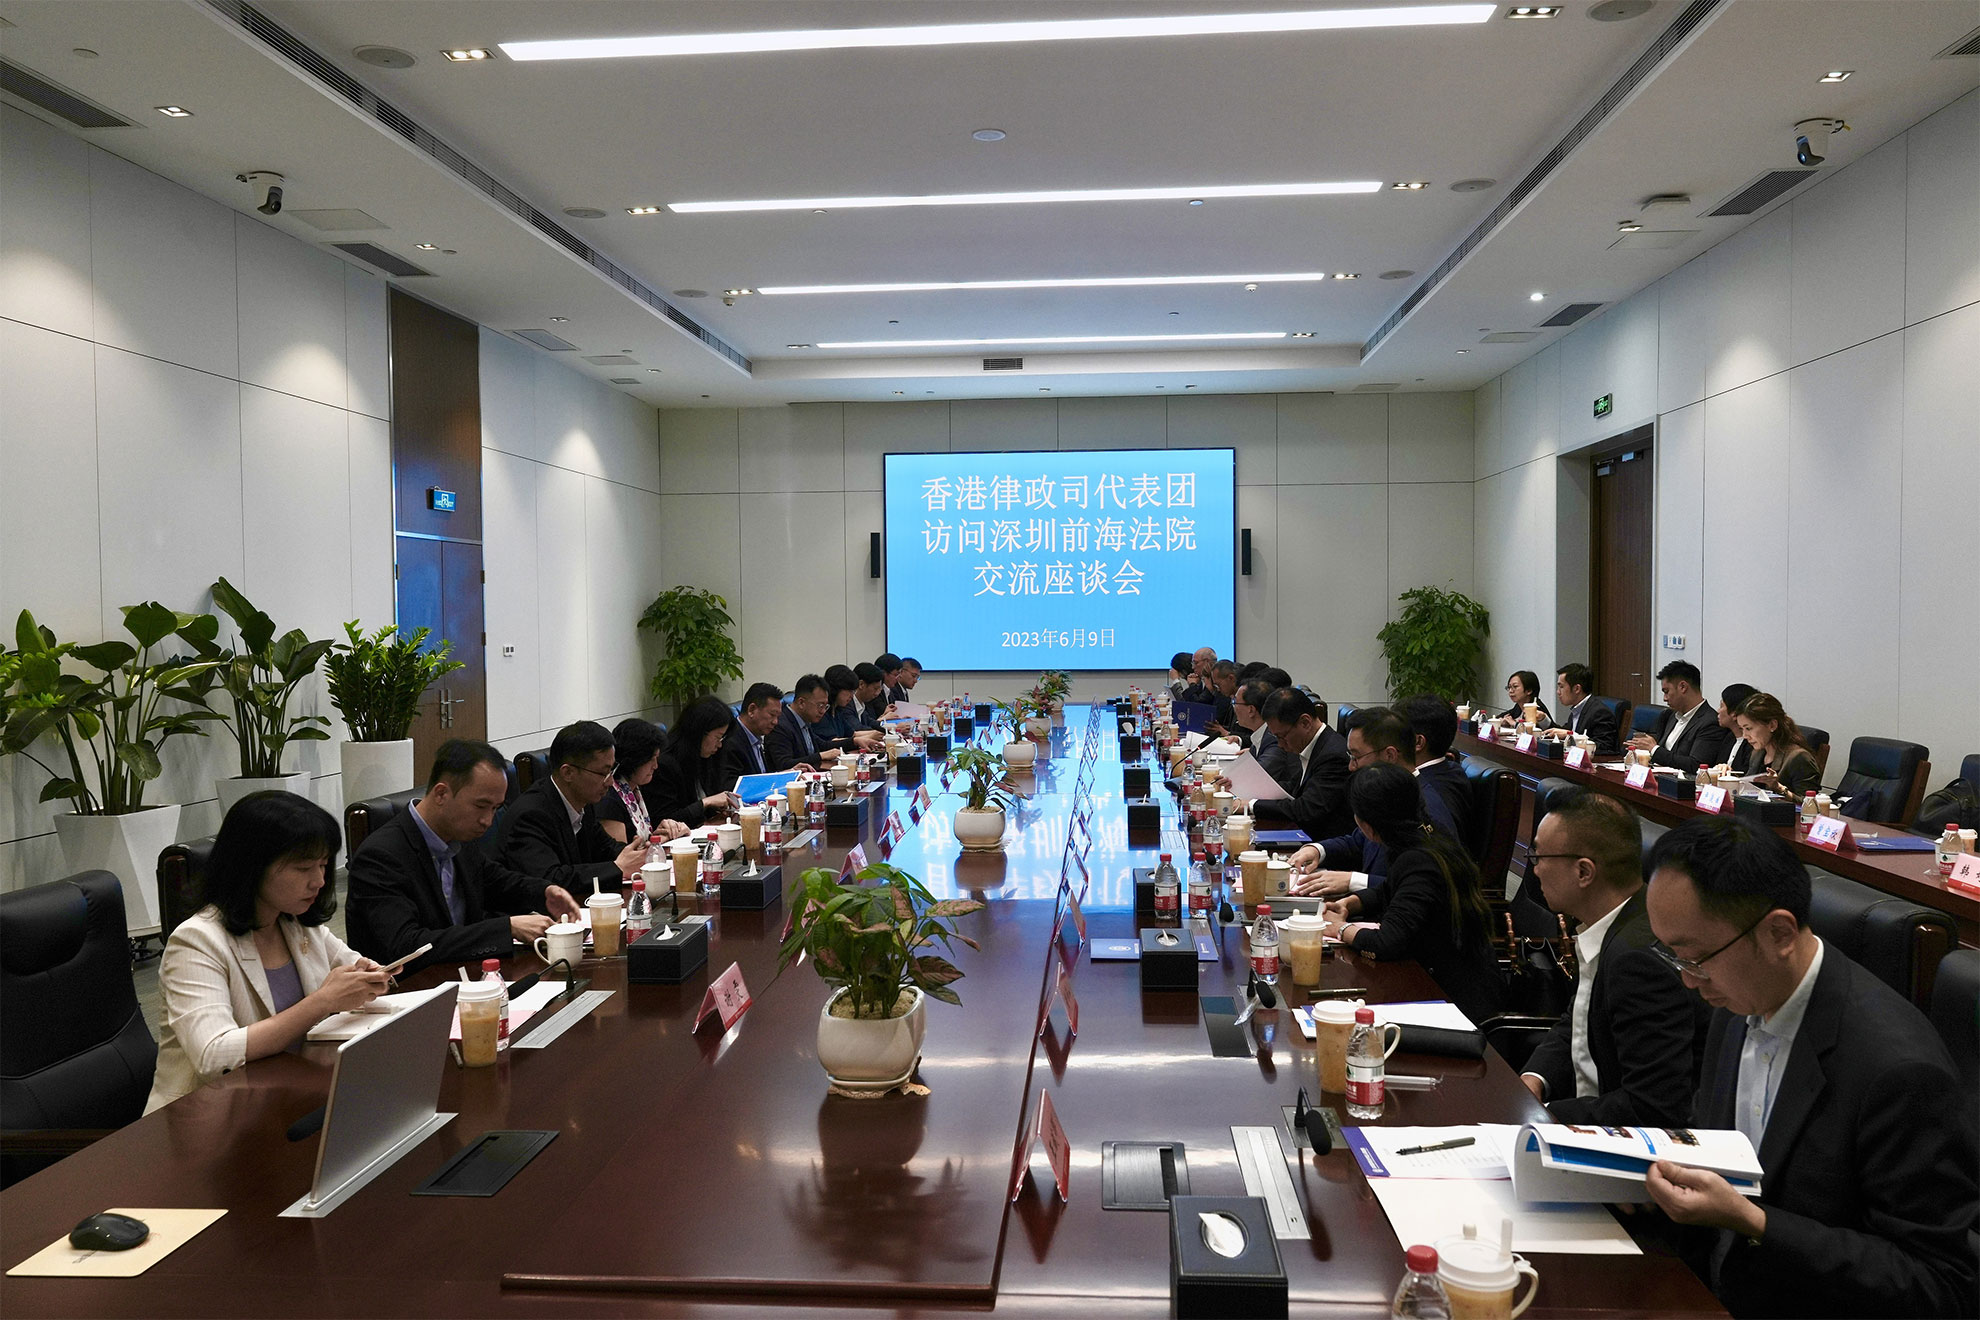 The Secretary for Justice, Mr Paul Lam, SC (seventh right), and the delegation comprising representatives from the Hong Kong legal sector call on the Shenzhen Qianhai Cooperation Zone People's Court (Qianhai Court) and met with the President of the Qianhai Court, Mr Bian Fei (seventh left), on the afternoon of June 9 in Shenzhen. Photo shows both sides in the meeting.